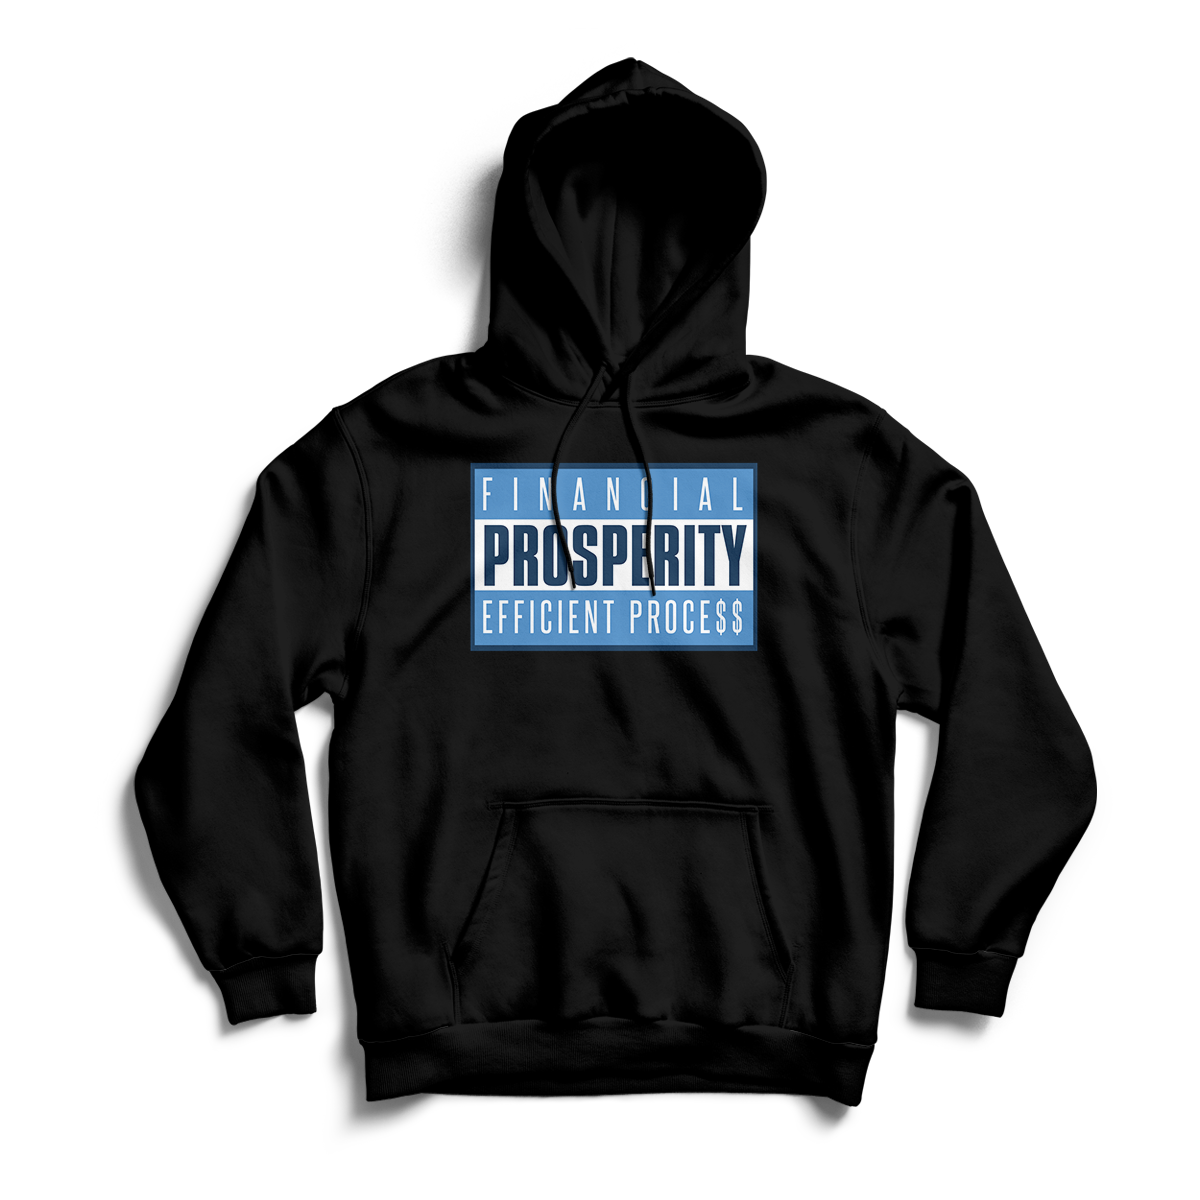 'Financial Advisory' in UNC CW Unisex Pullover Hoodie